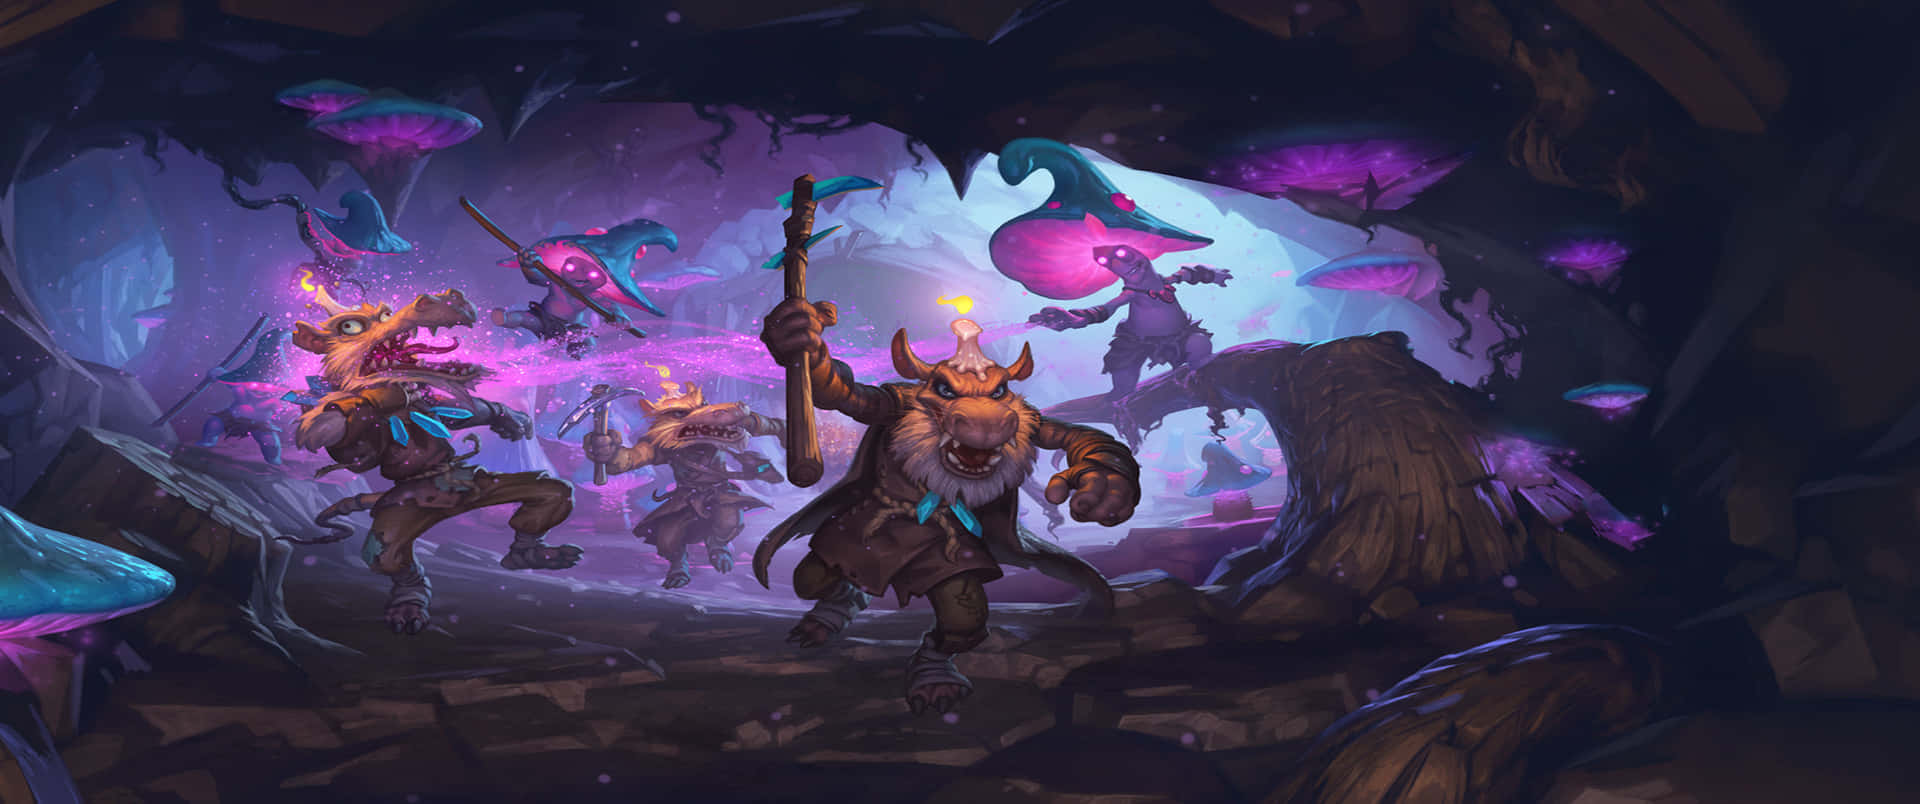 Get ready to battle in the incredible world of Hearthstone in breathtaking 3440x1440p resolution!